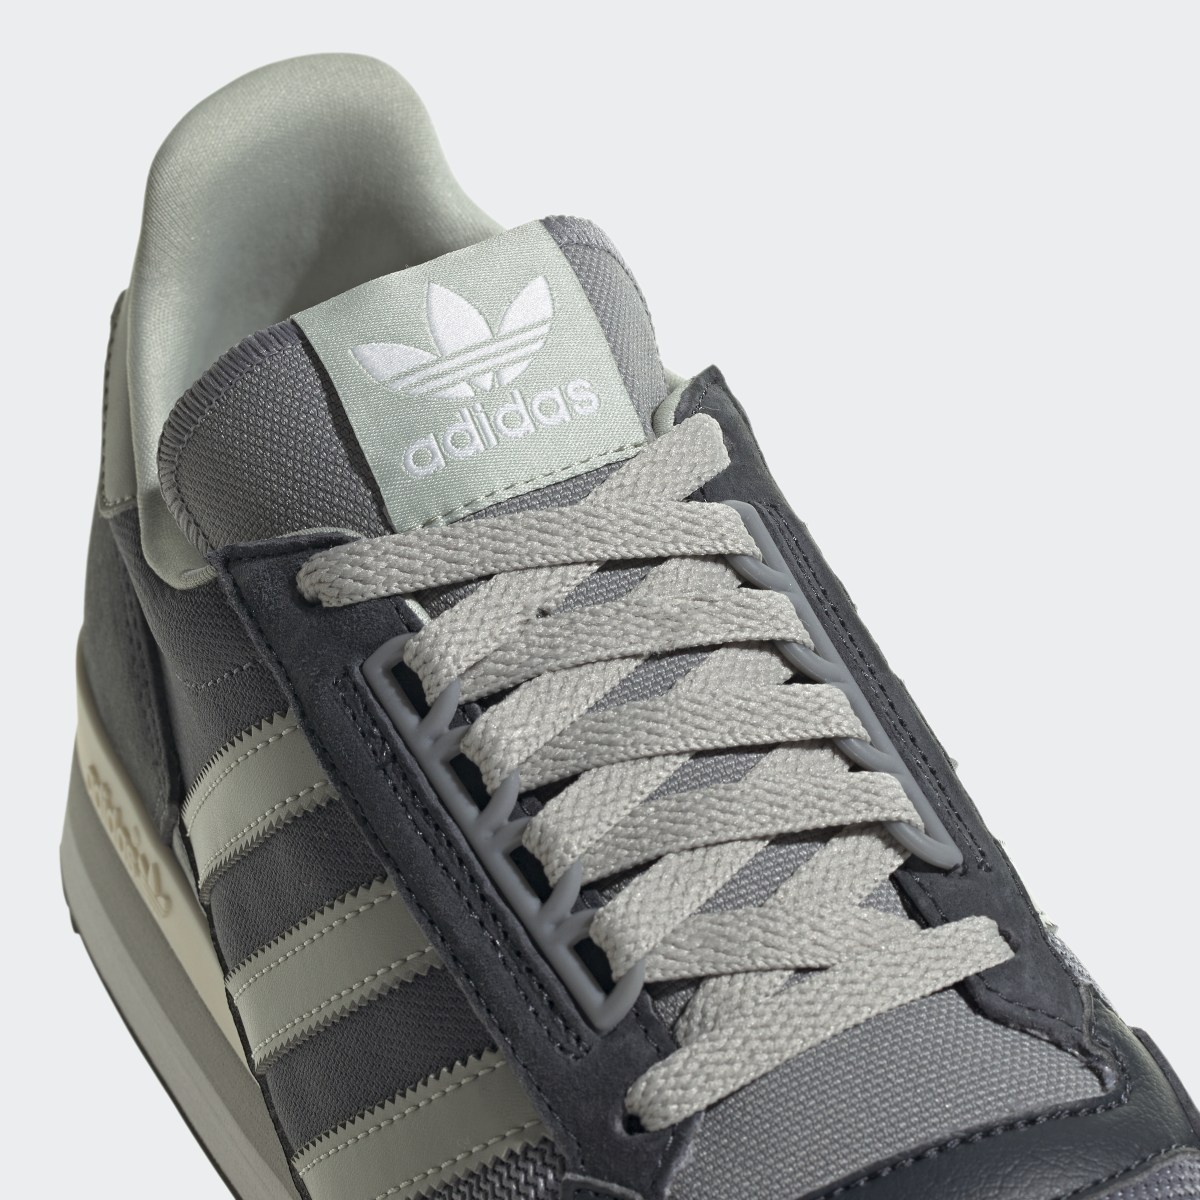 Adidas ZX 500 Shoes. 9